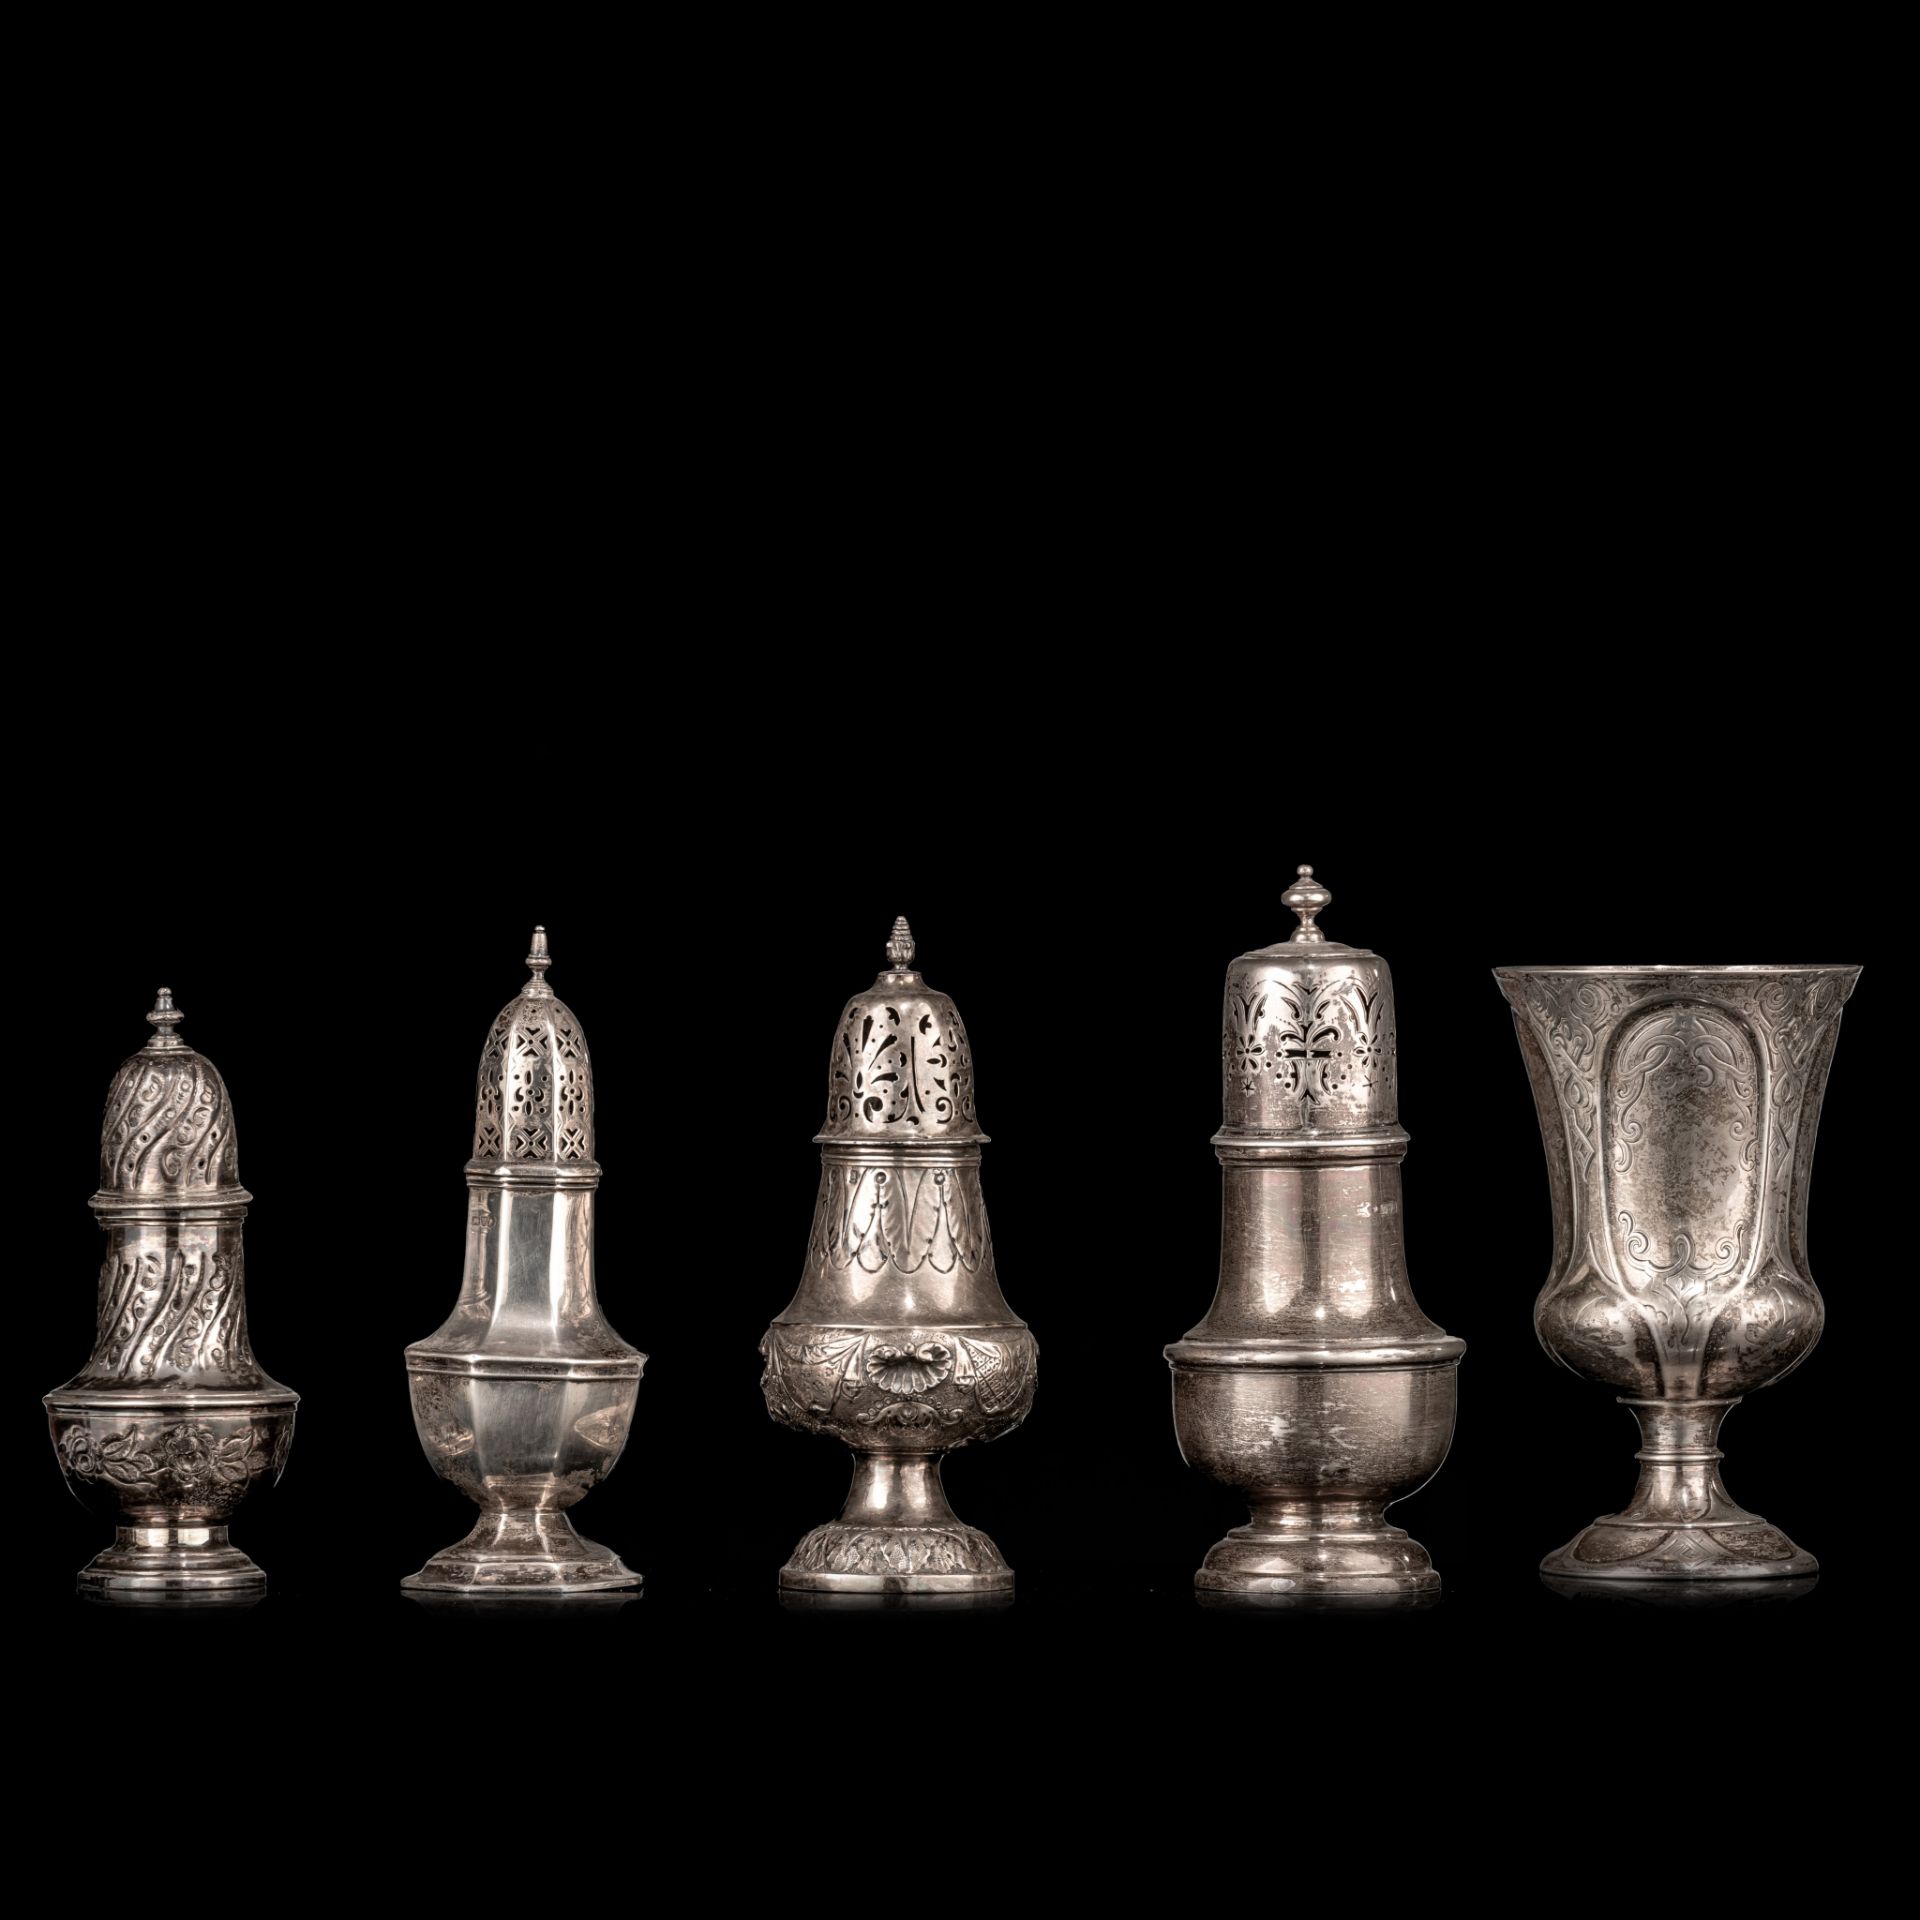 A various collection of silver, H 15,3 - 20 cm, total weight: 945 g